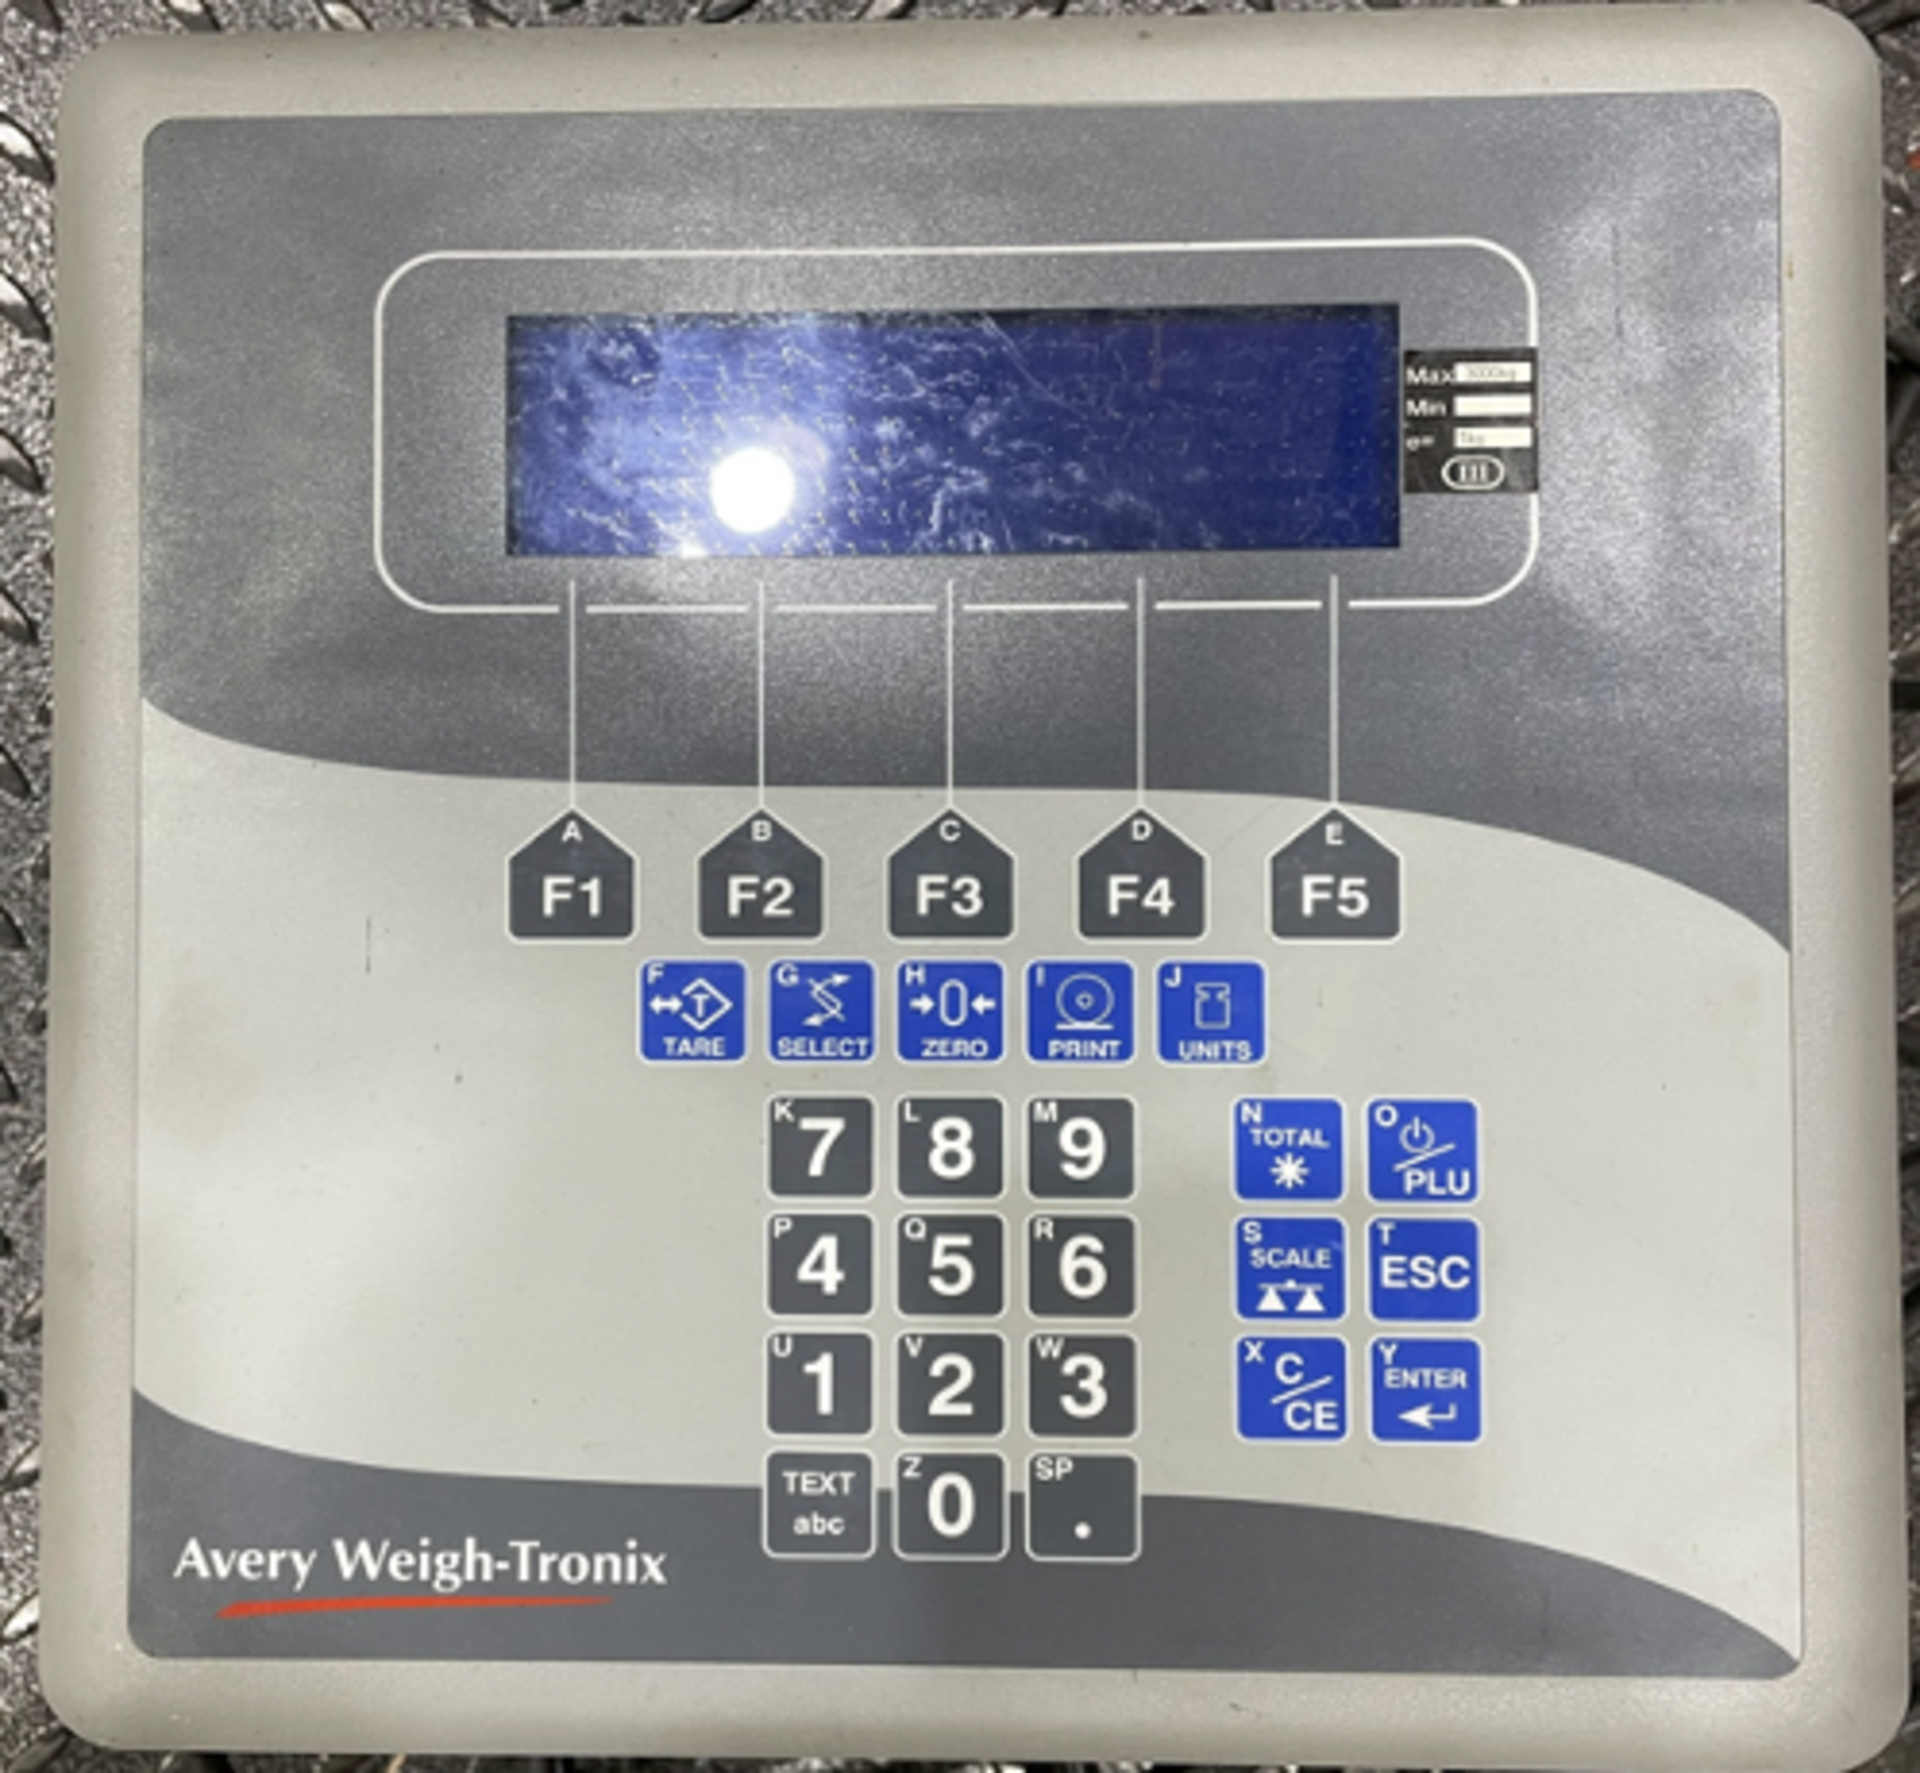 2020, Avery Weigh-Tronix – industrial weighing scale 3000kg - Image 2 of 2